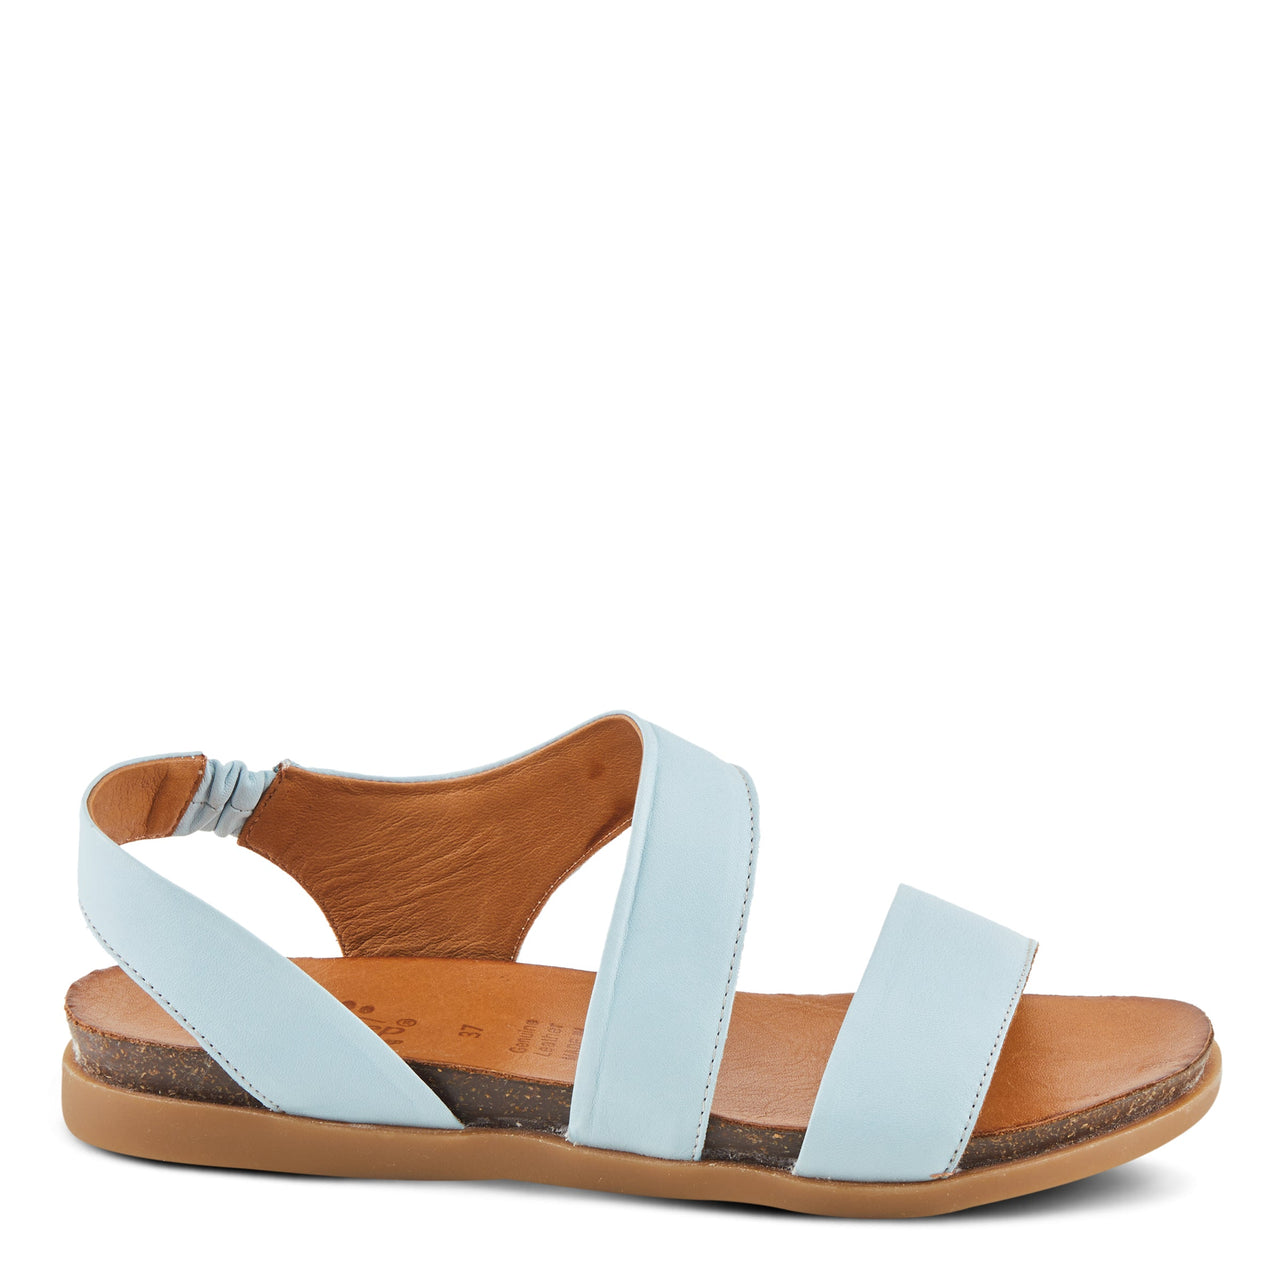 Stylish Spring Step Besitos Sandals with cushioned insoles and adjustable straps